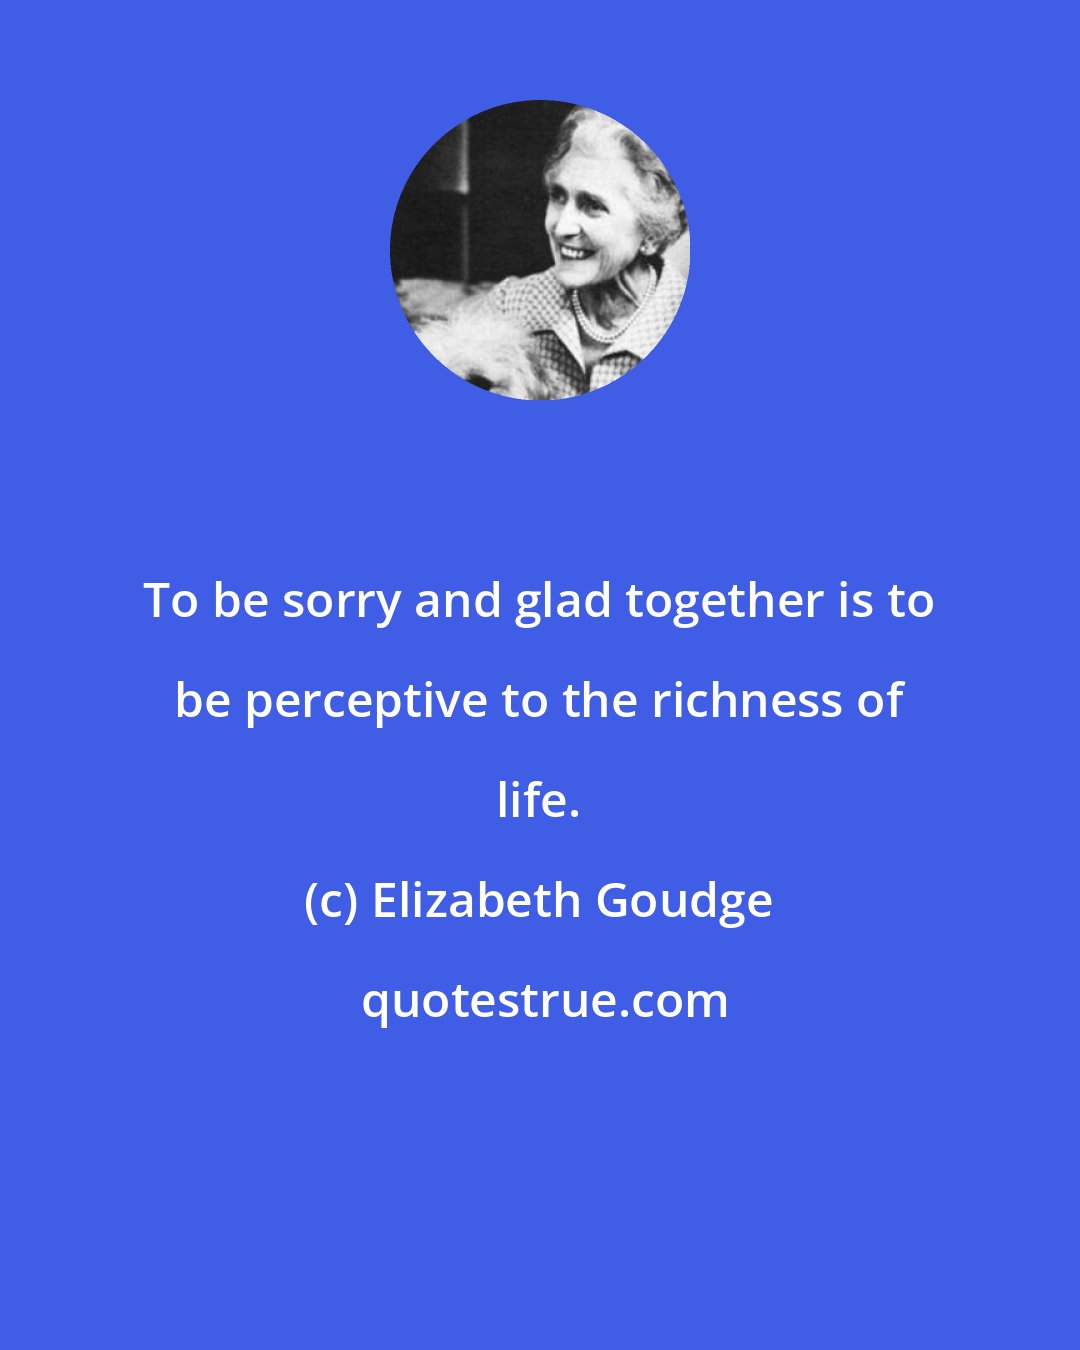 Elizabeth Goudge: To be sorry and glad together is to be perceptive to the richness of life.